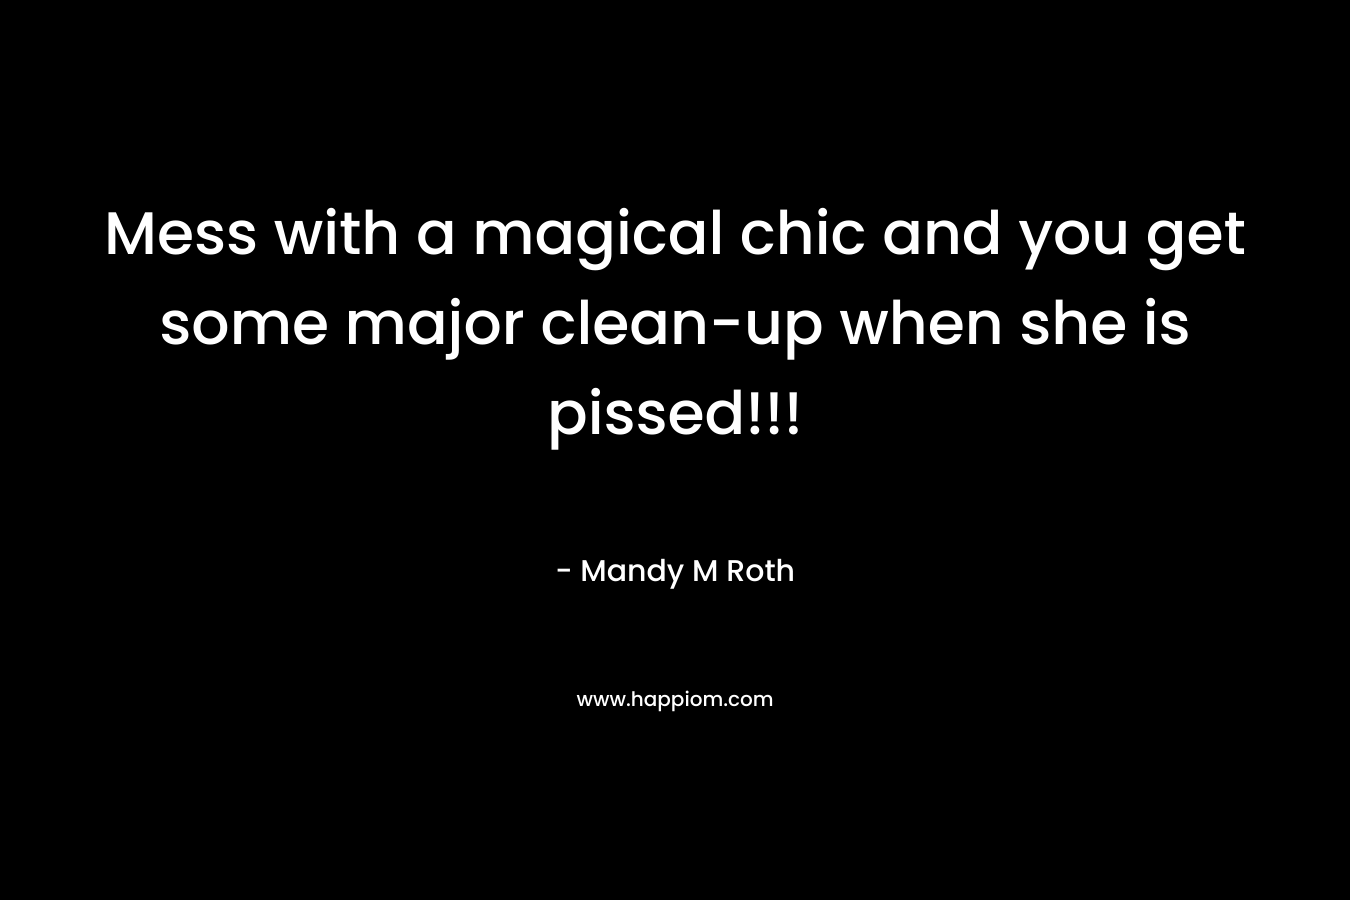 Mess with a magical chic and you get some major clean-up when she is pissed!!! – Mandy M Roth